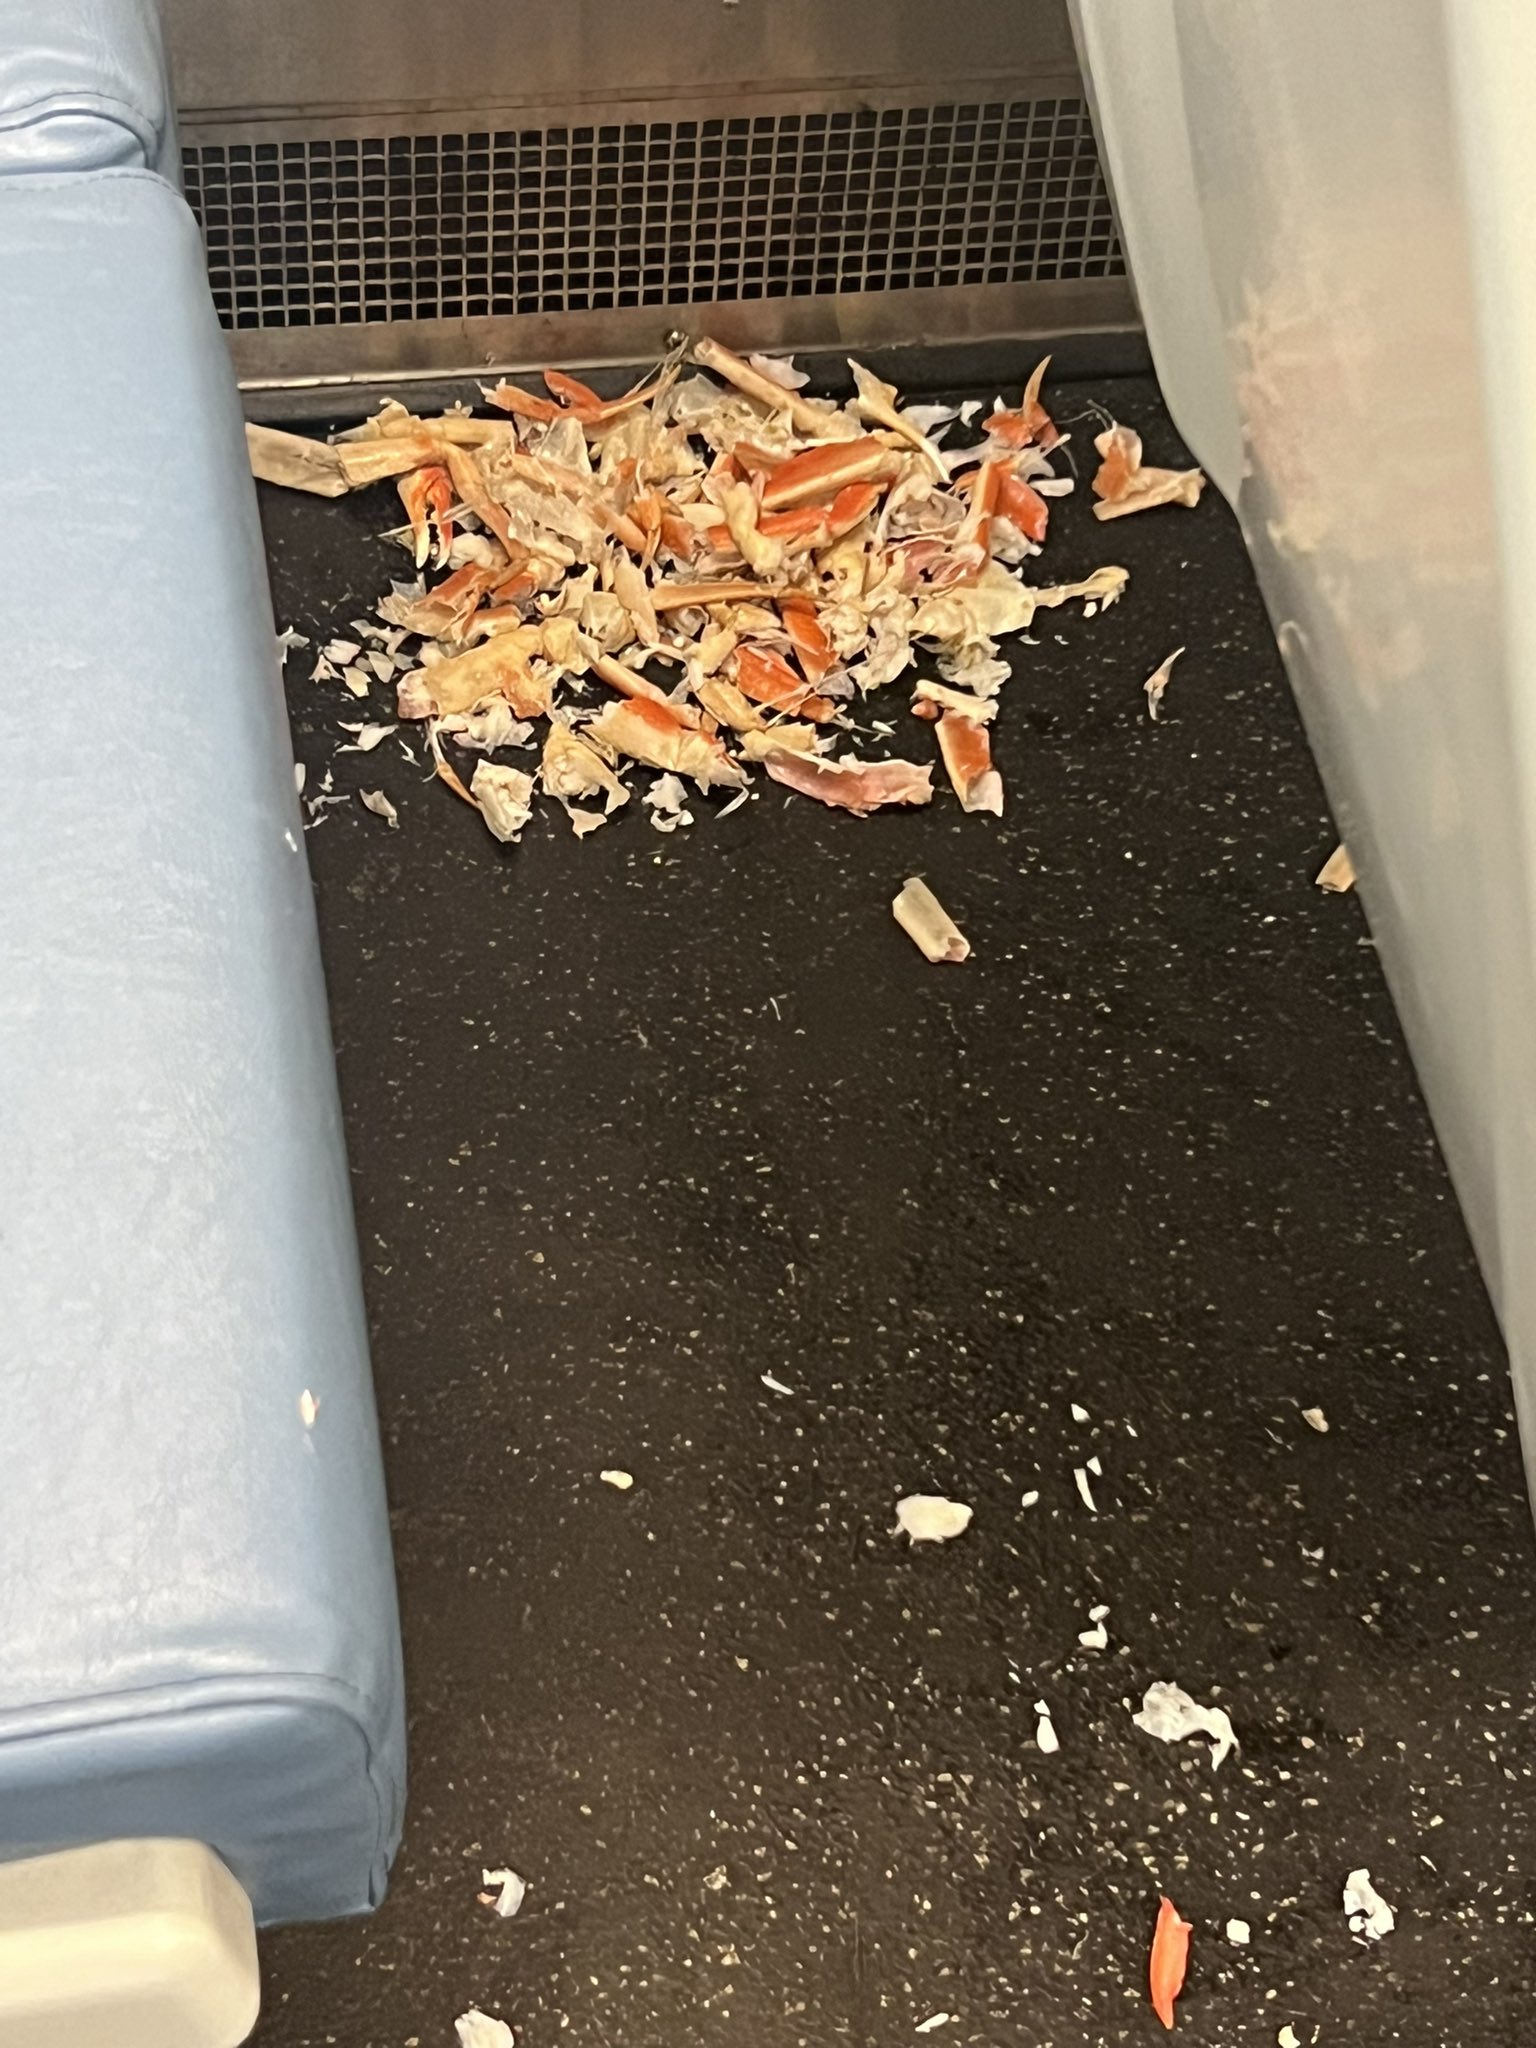 Passenger sparks debate after eating crab legs and then leaves the mess on a train 2